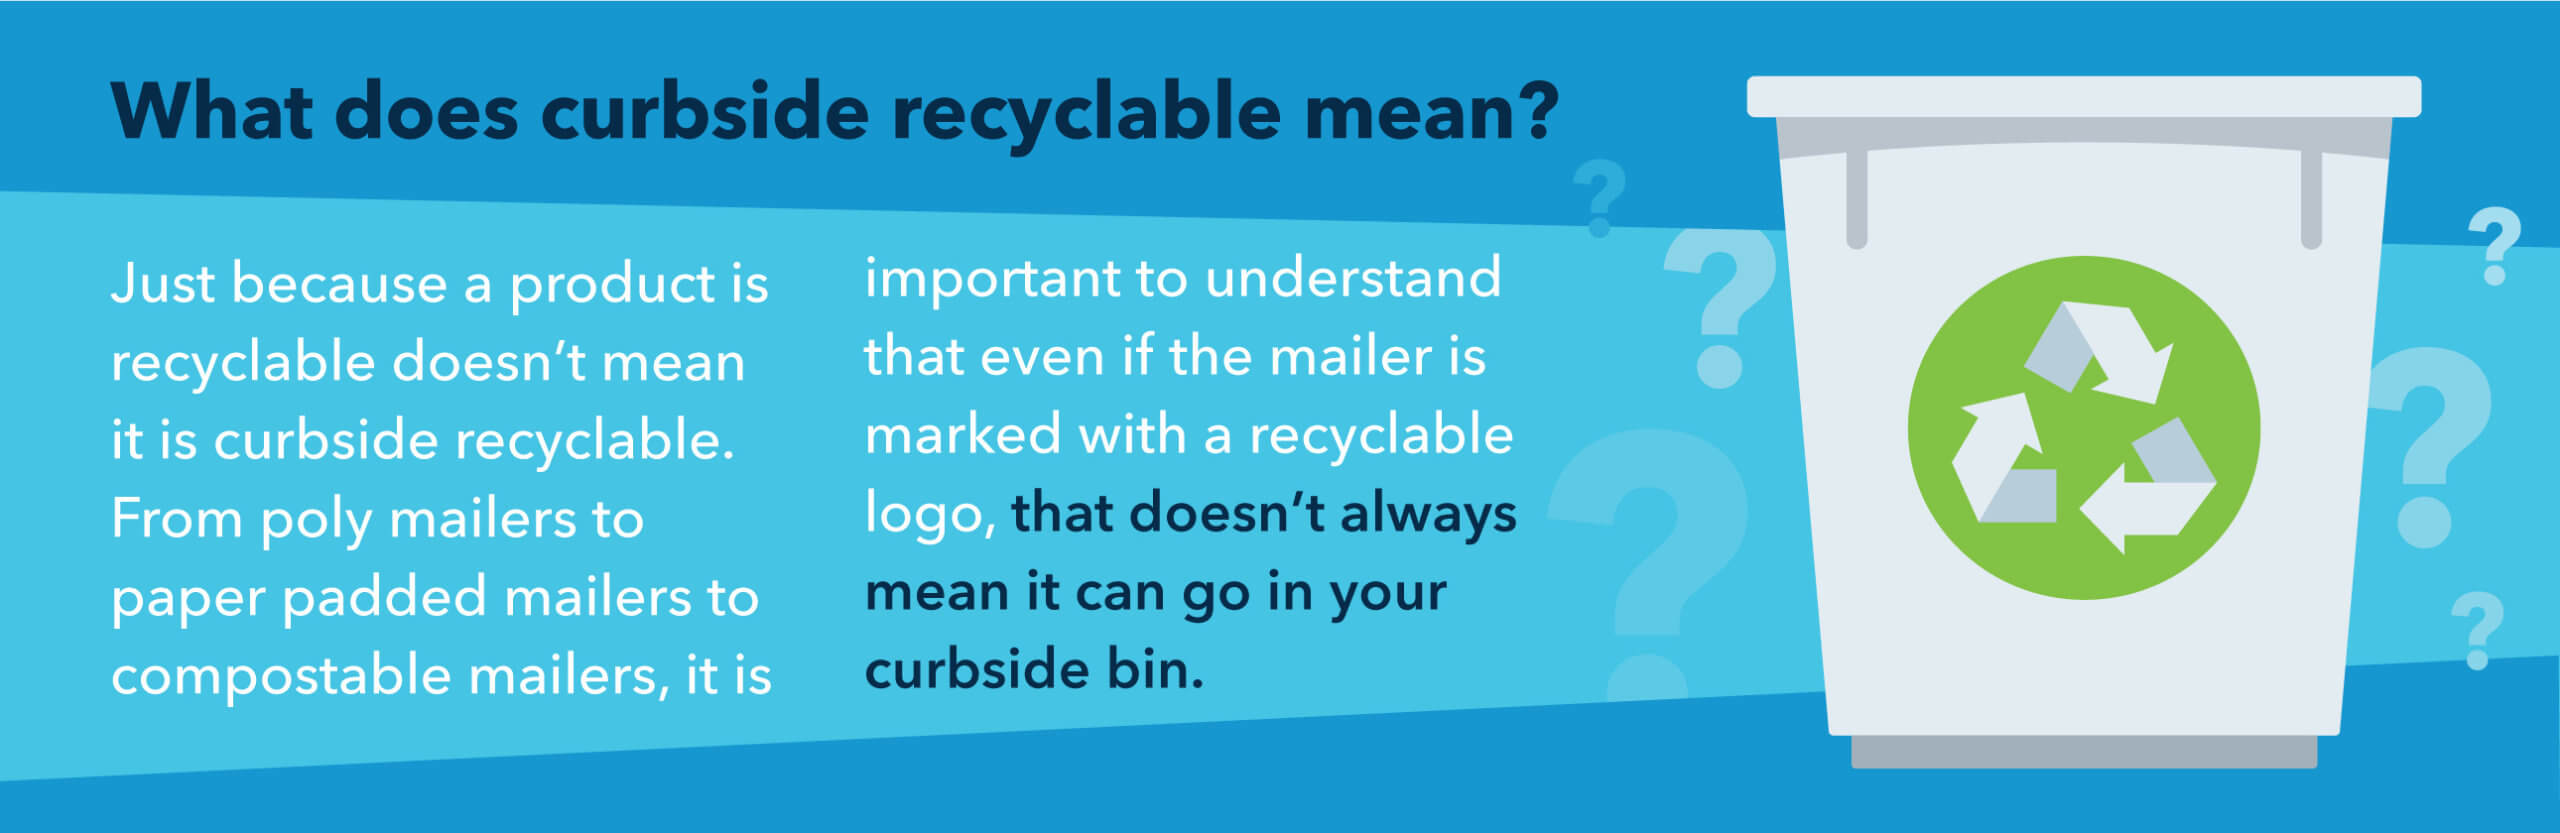 recycling is important because